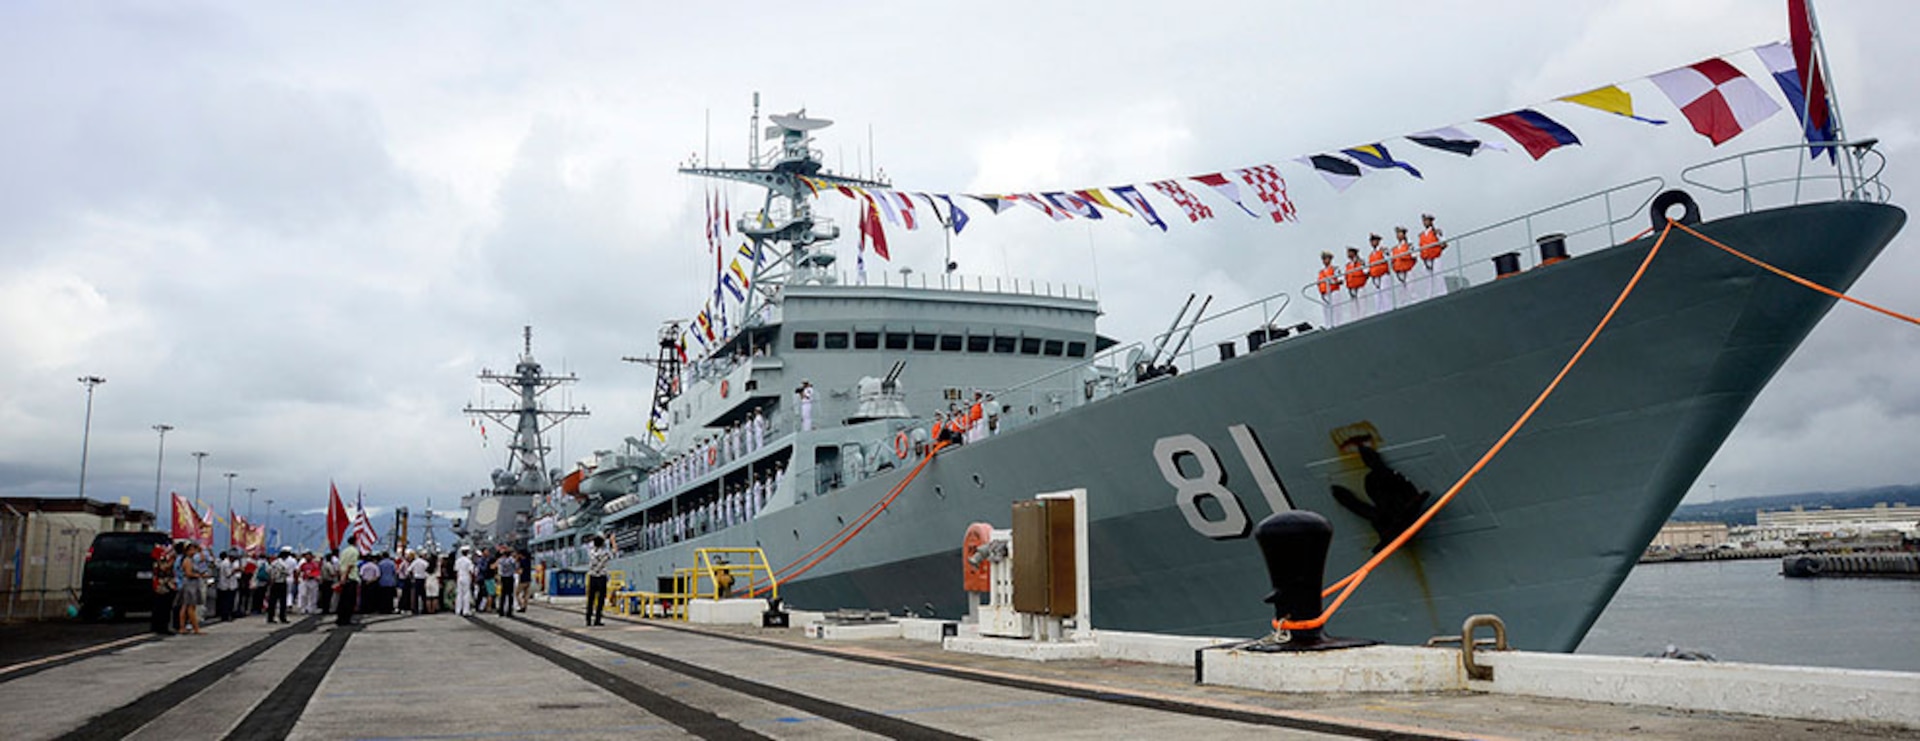 PEARL HARBOR (Oct. 12, 2015) - The People's Liberation Army Navy midshipmen training ship Zheng He (Type 679, Hull 81) is moored pierside at Joint Base Pearl Harbor-Hickam, Hawaii during a scheduled port visit. Personnel from Zheng He are scheduled to participate in several exchanges during the visit with Sailors assigned to the guided-missile cruiser USS Chosin (CG 65). 